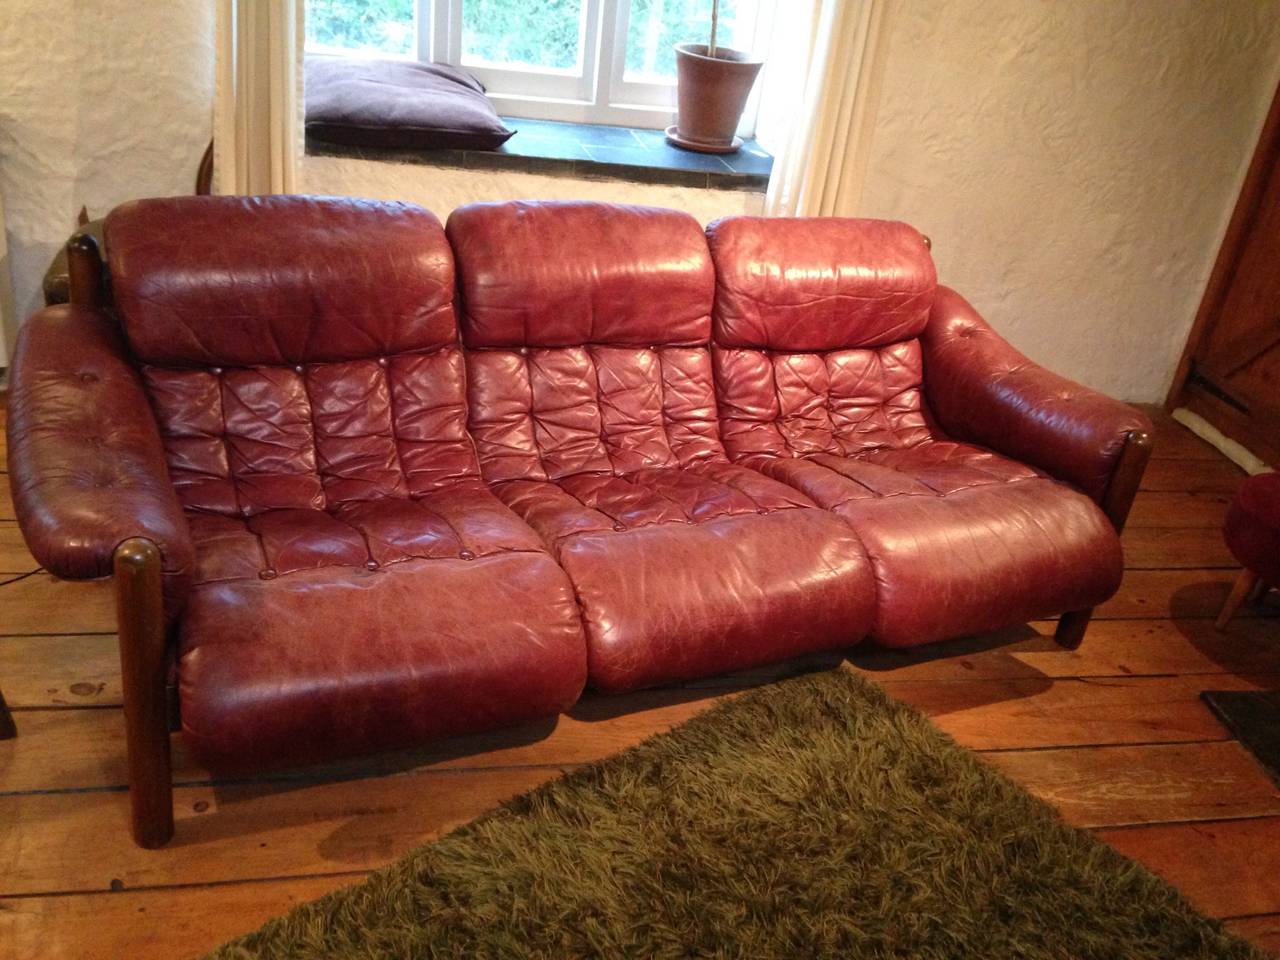 Vintage Danish Rosewood Sofa in Oxblood Leather, circa 1960s In Good Condition For Sale In London, GB